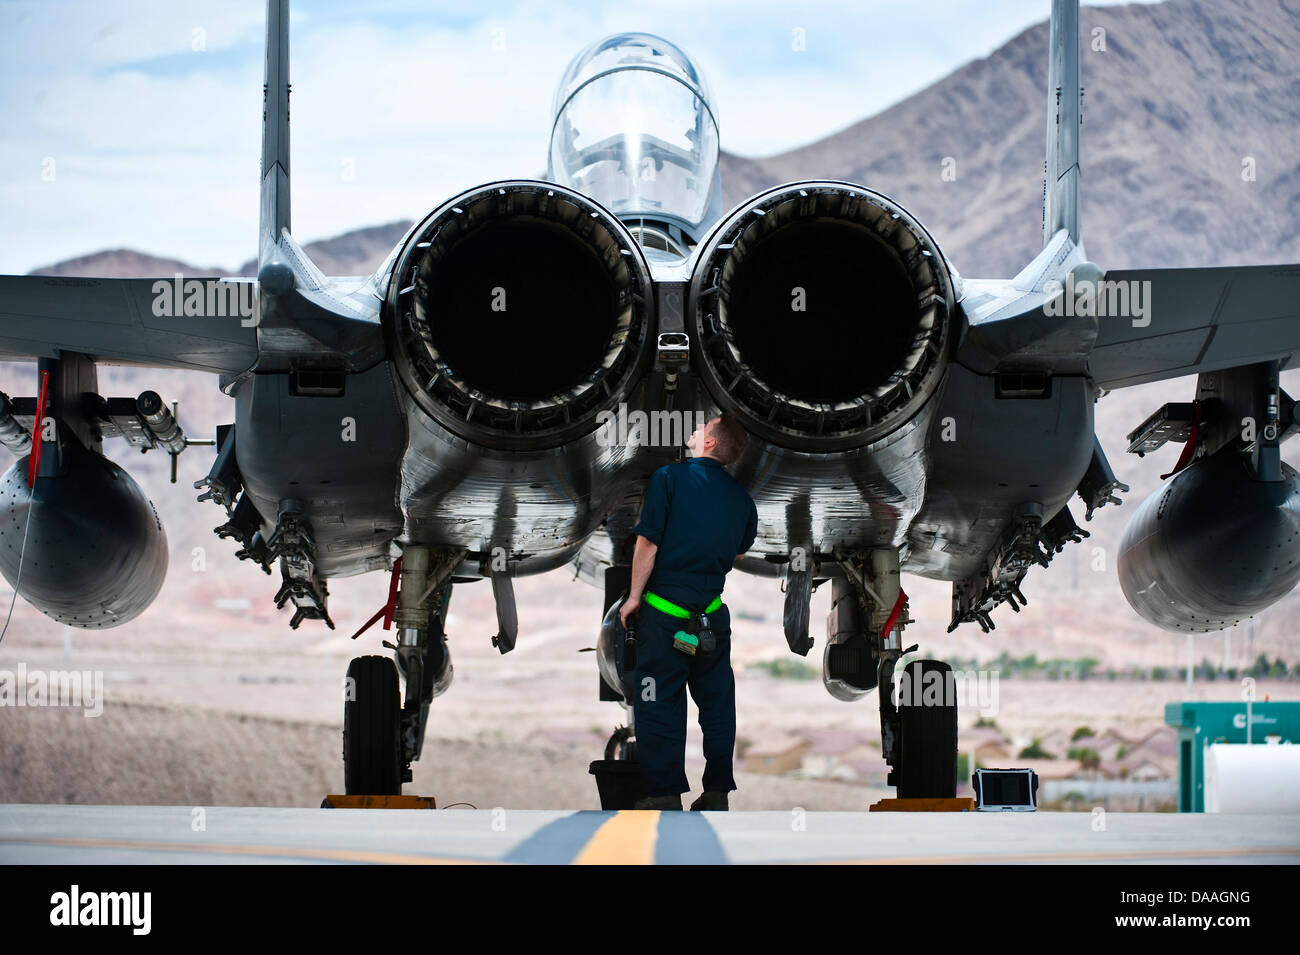 Senior Airman Nicholas Smyth, 4th Aircraft Maintenance Squadron crew chief, Seymour Johnson Air Force Base, N.C., inspects an F-15E Strike Eagle during Green Flag-West 13-5 June 24, 2013, at Nellis Air Force Base, Nev. A typical Green Flag exercise involv Stock Photo